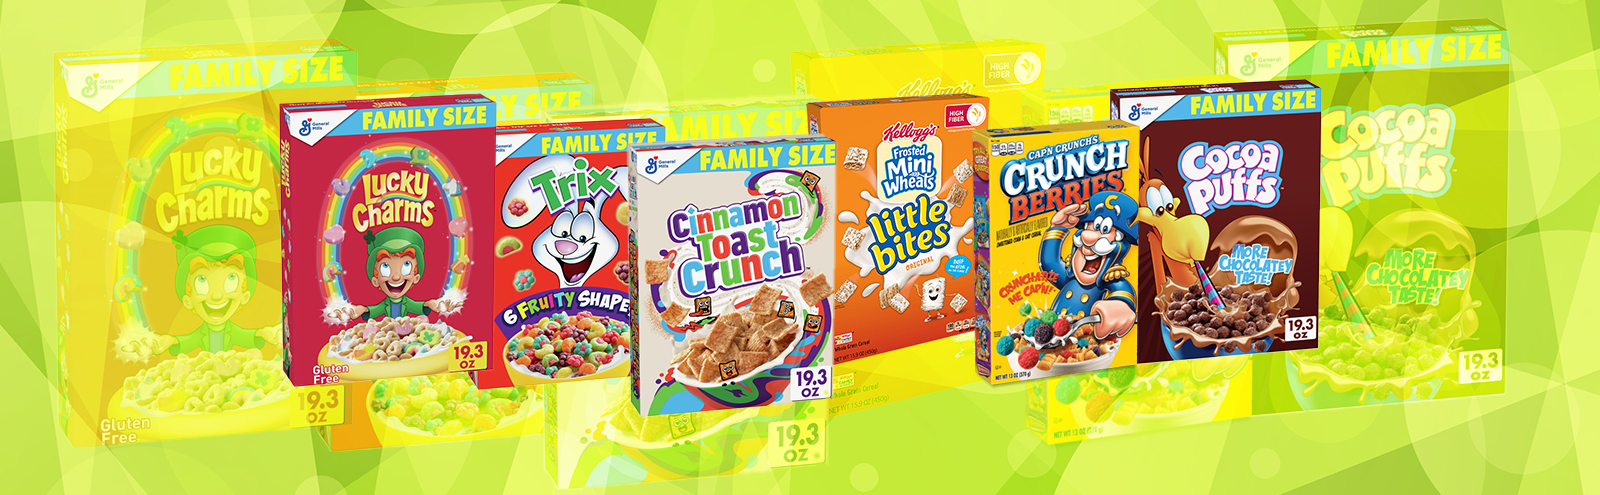 Kellogg's Frosted Flakes introducing three new flavors - Grand